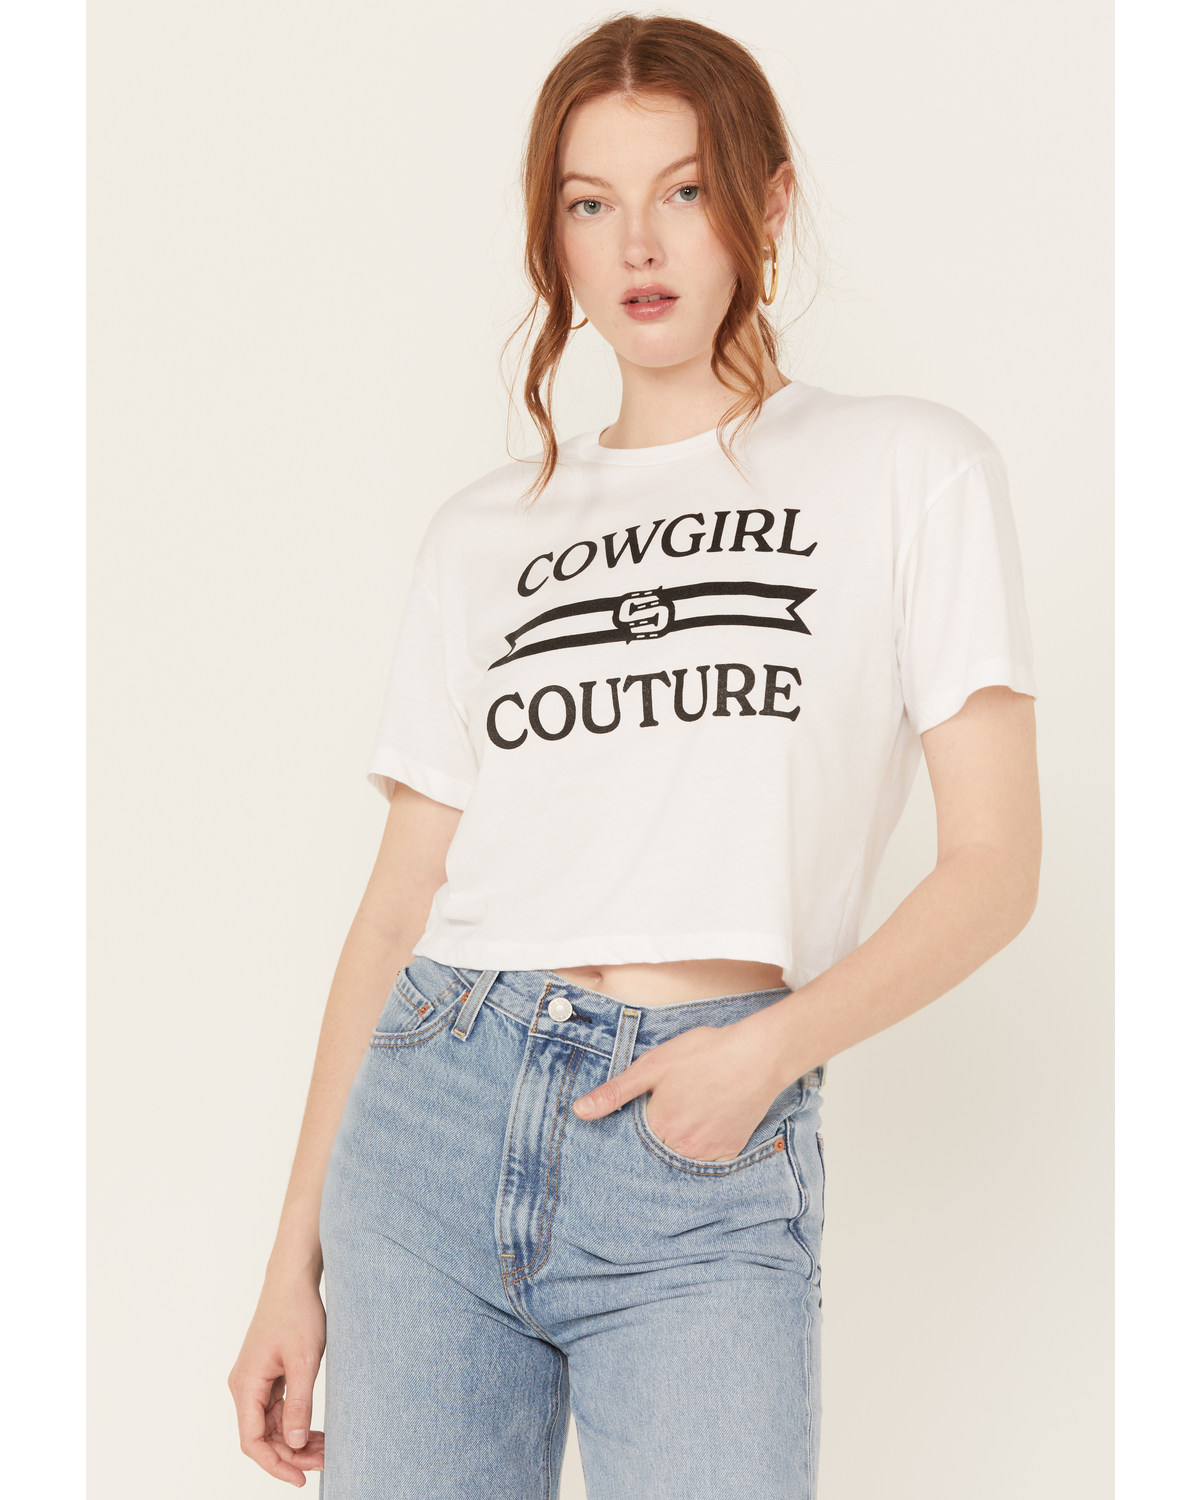 Ali Dee Women's Cowgirl Couture Cropped Graphic Tee